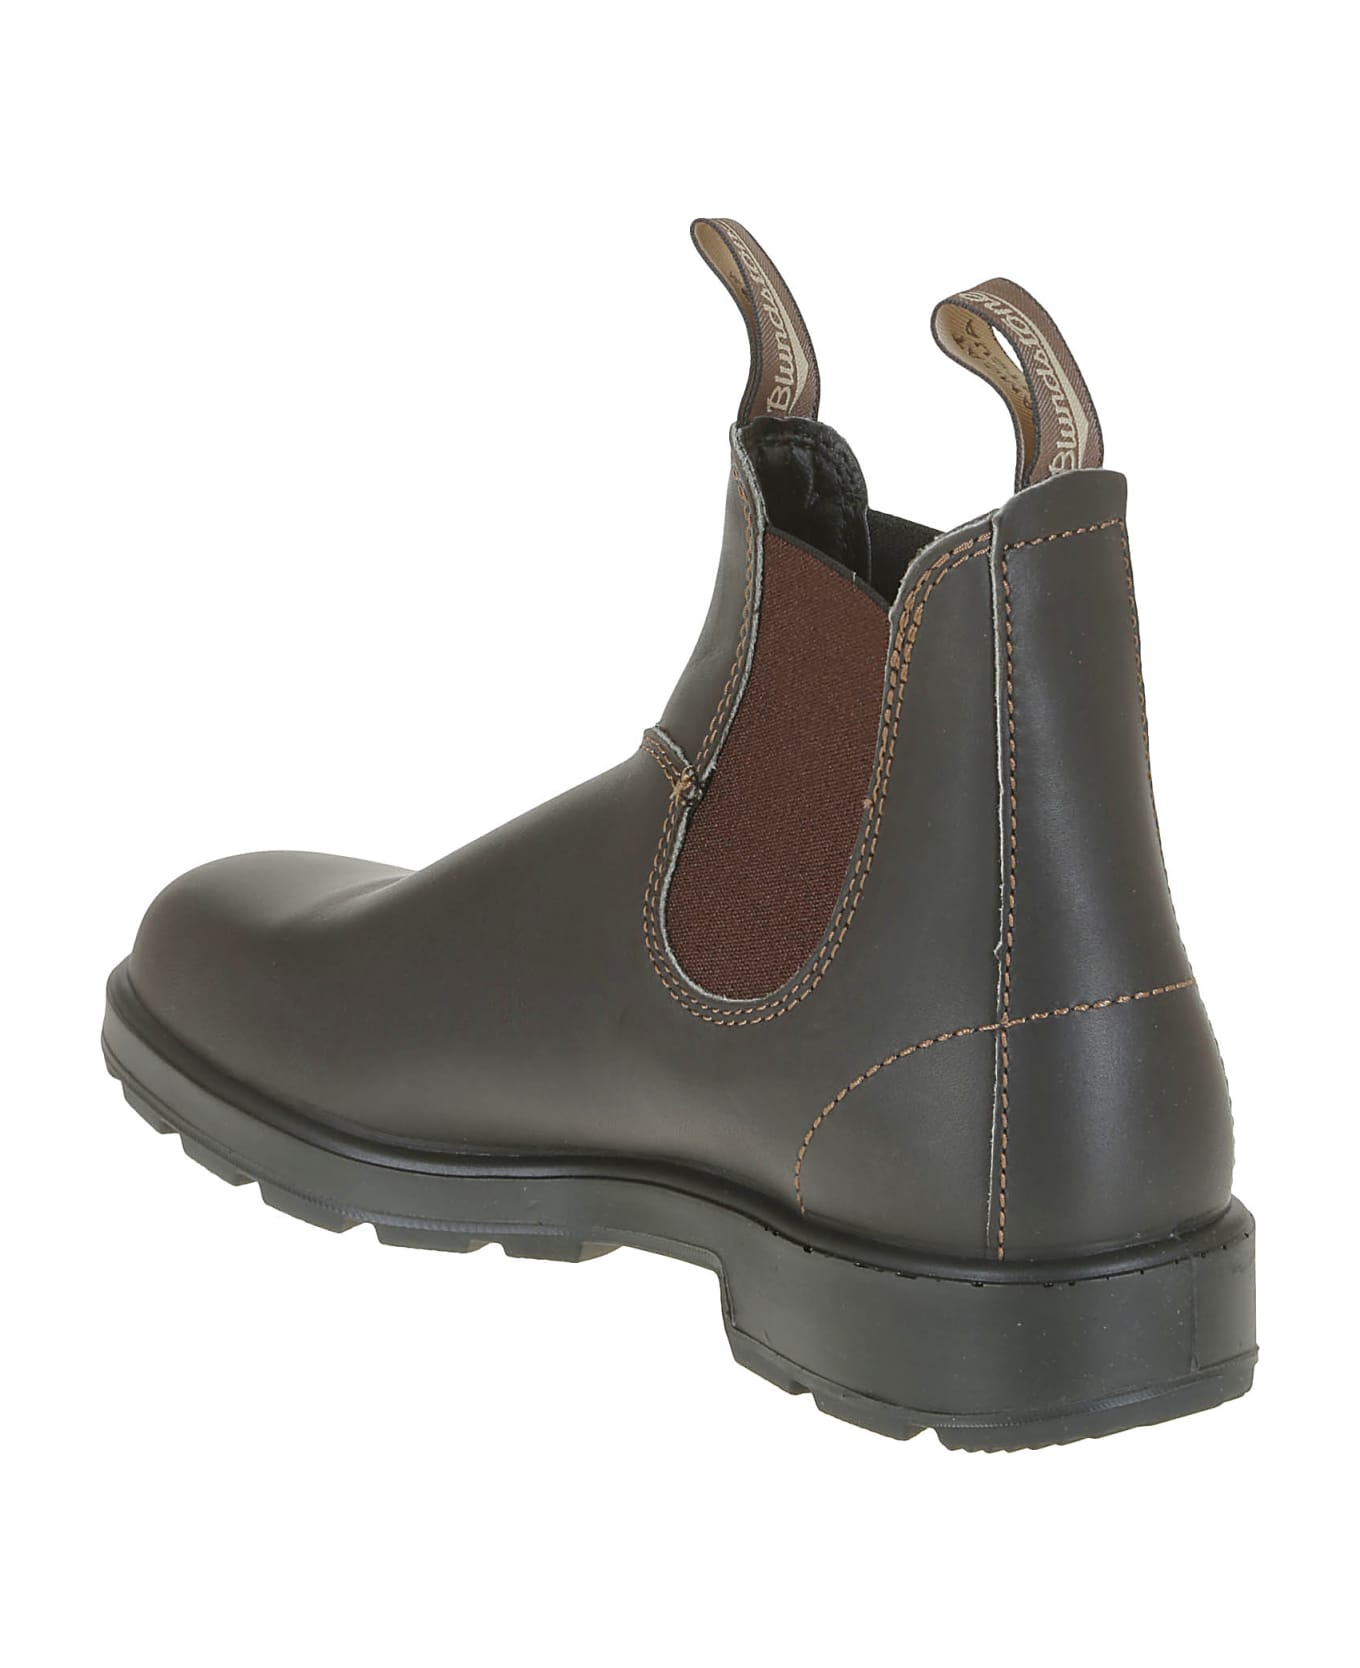 Blundstone 500 Stout Brown Leather - Stout Brown & Brown ブーツ